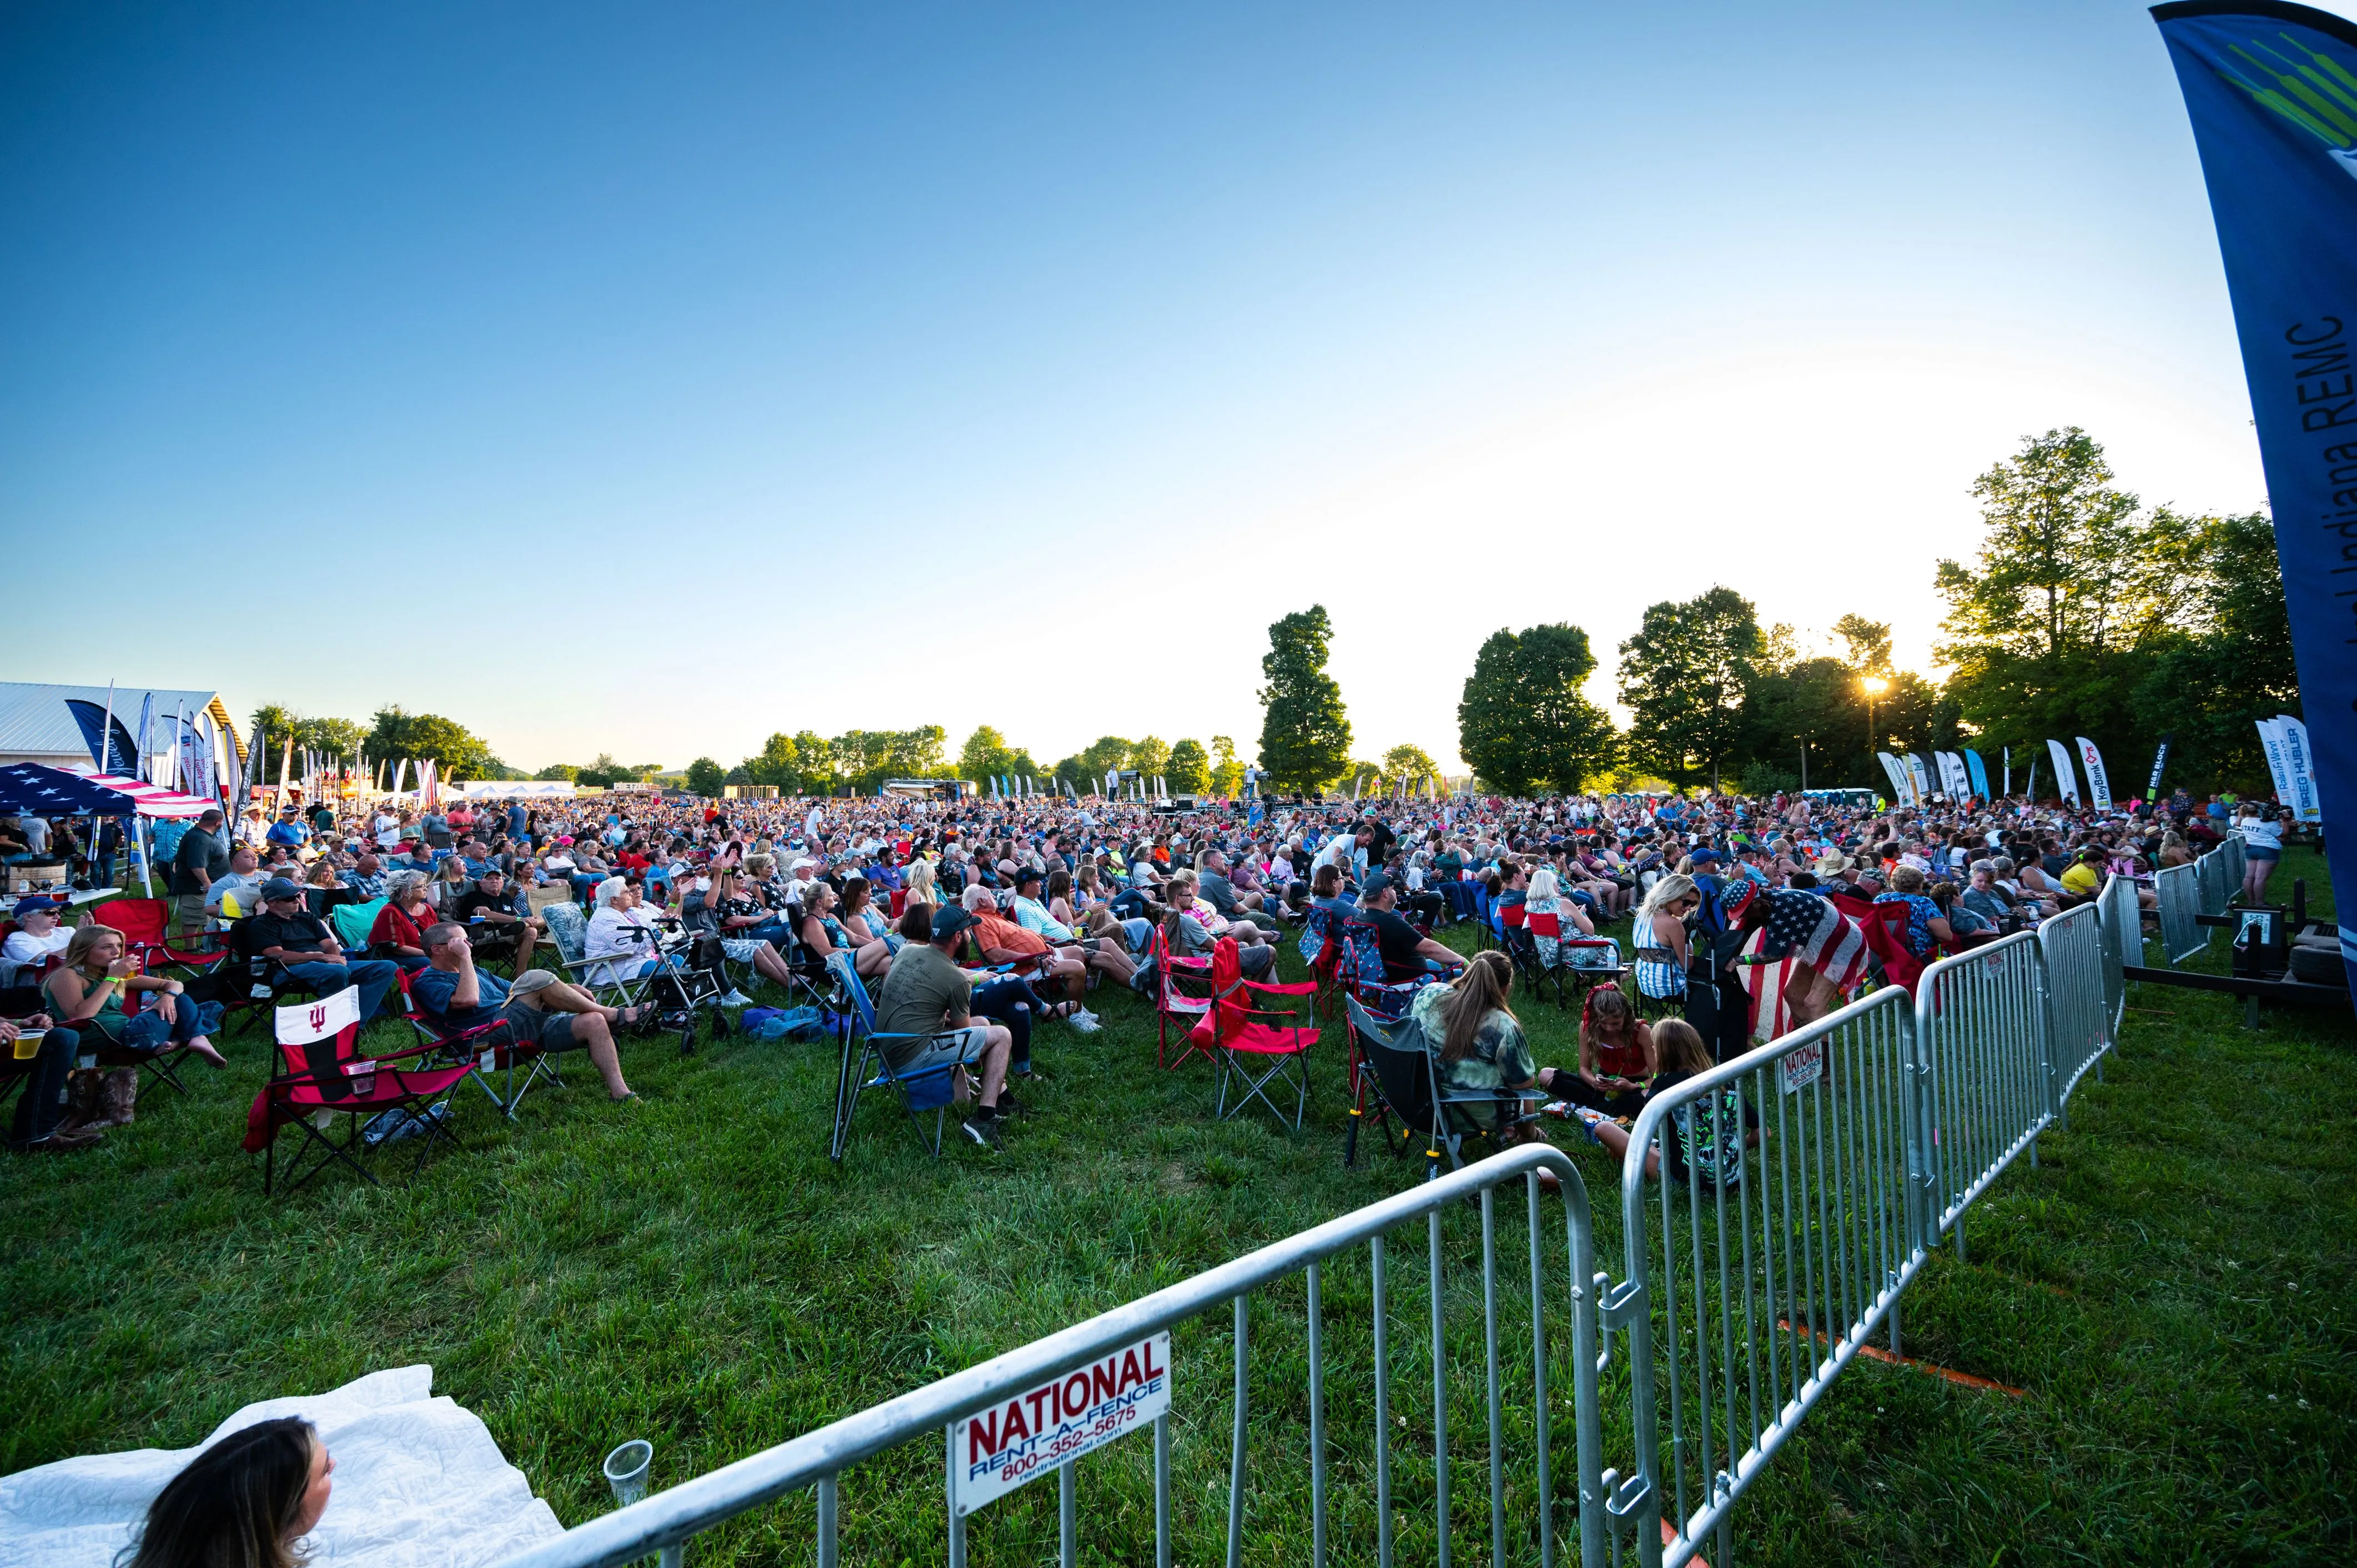 Outdoor event with a large crowd of people sitting on the grass behind barrier fences under a clear blue sky.